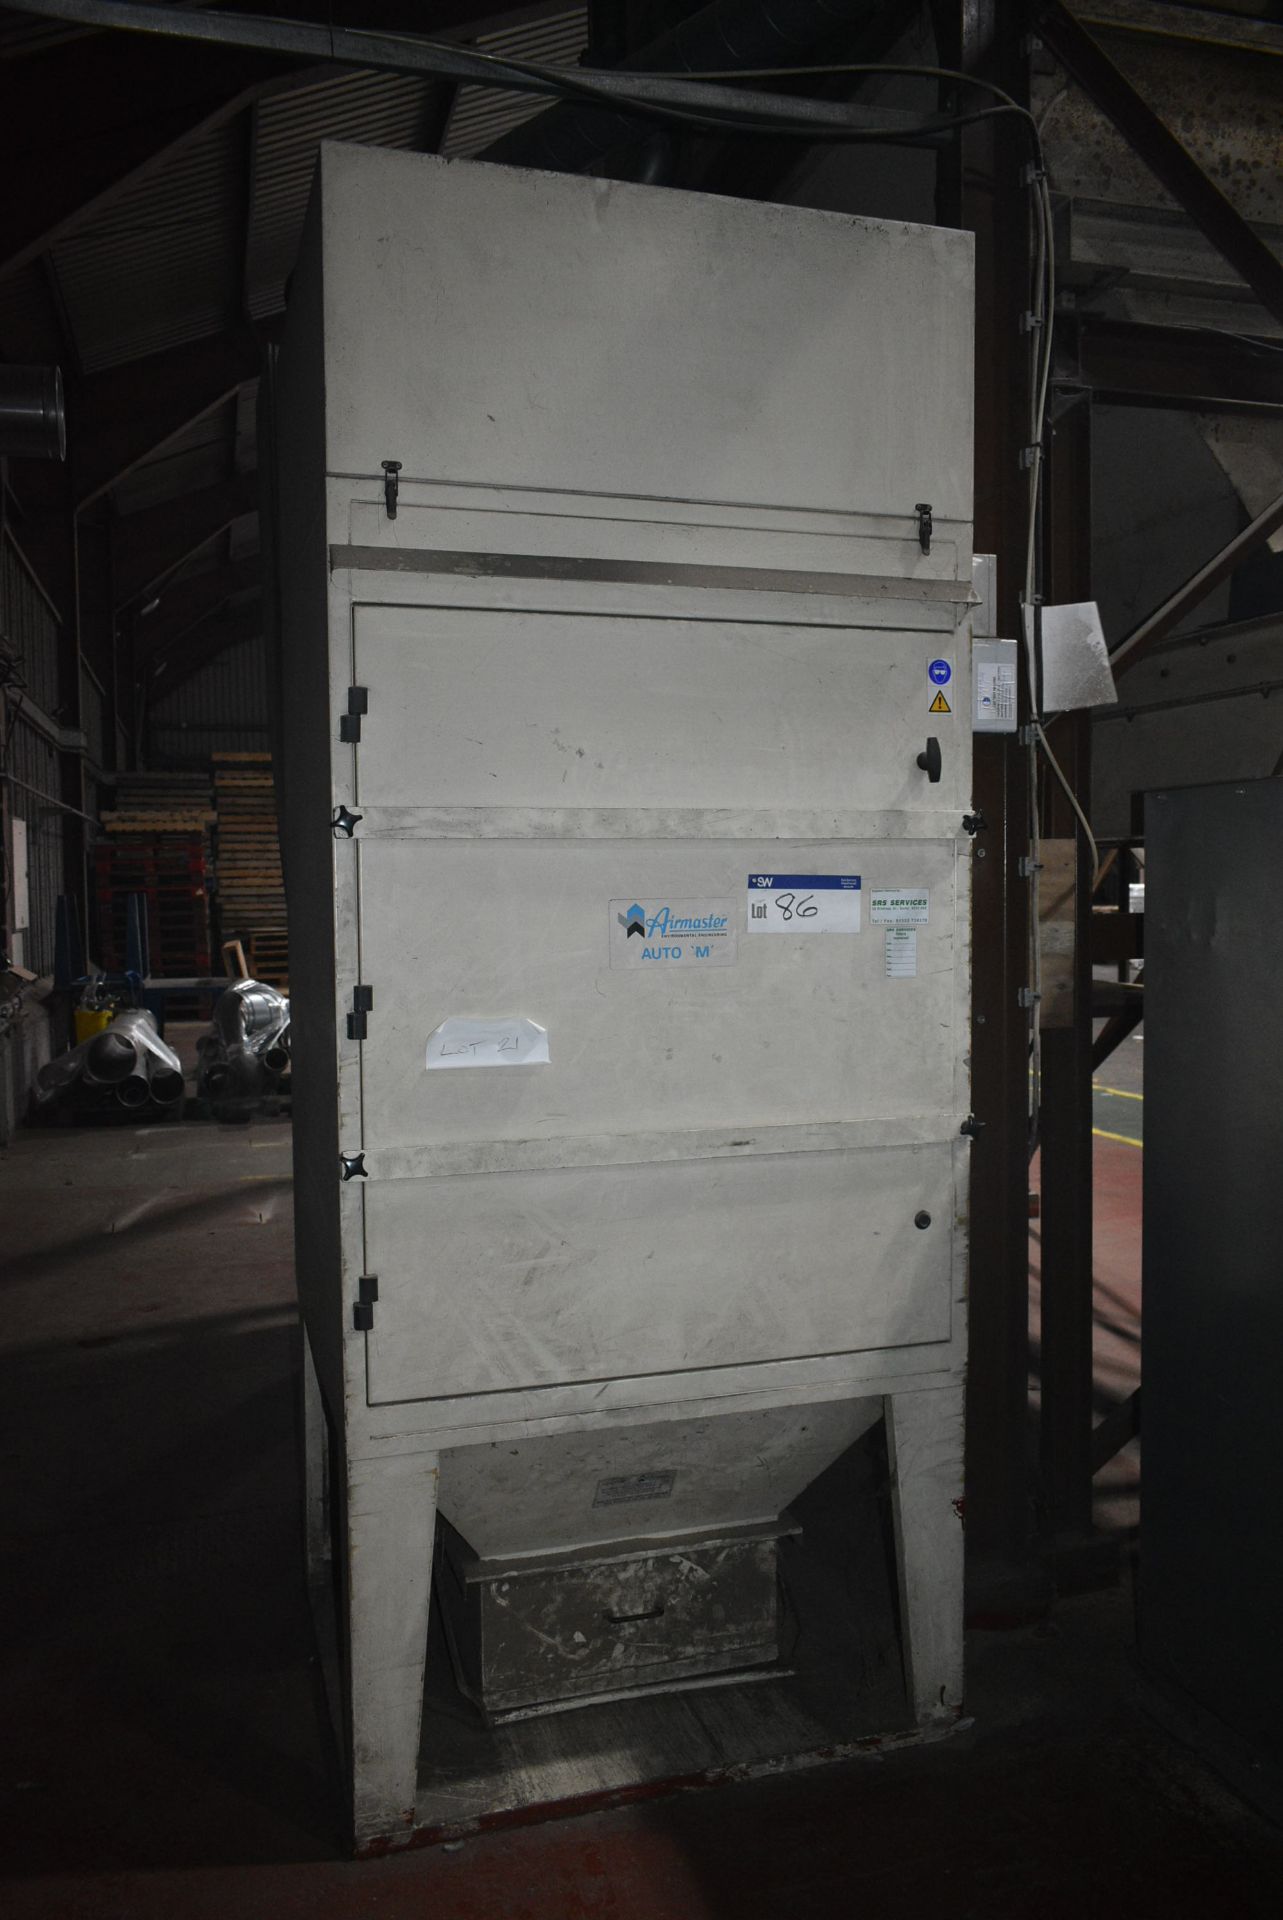 Airmaster AUTO M 25M/ 4.0 DUST COLLECTION UNIT, serial no. 96173790, 4kW, with immediate ducting (